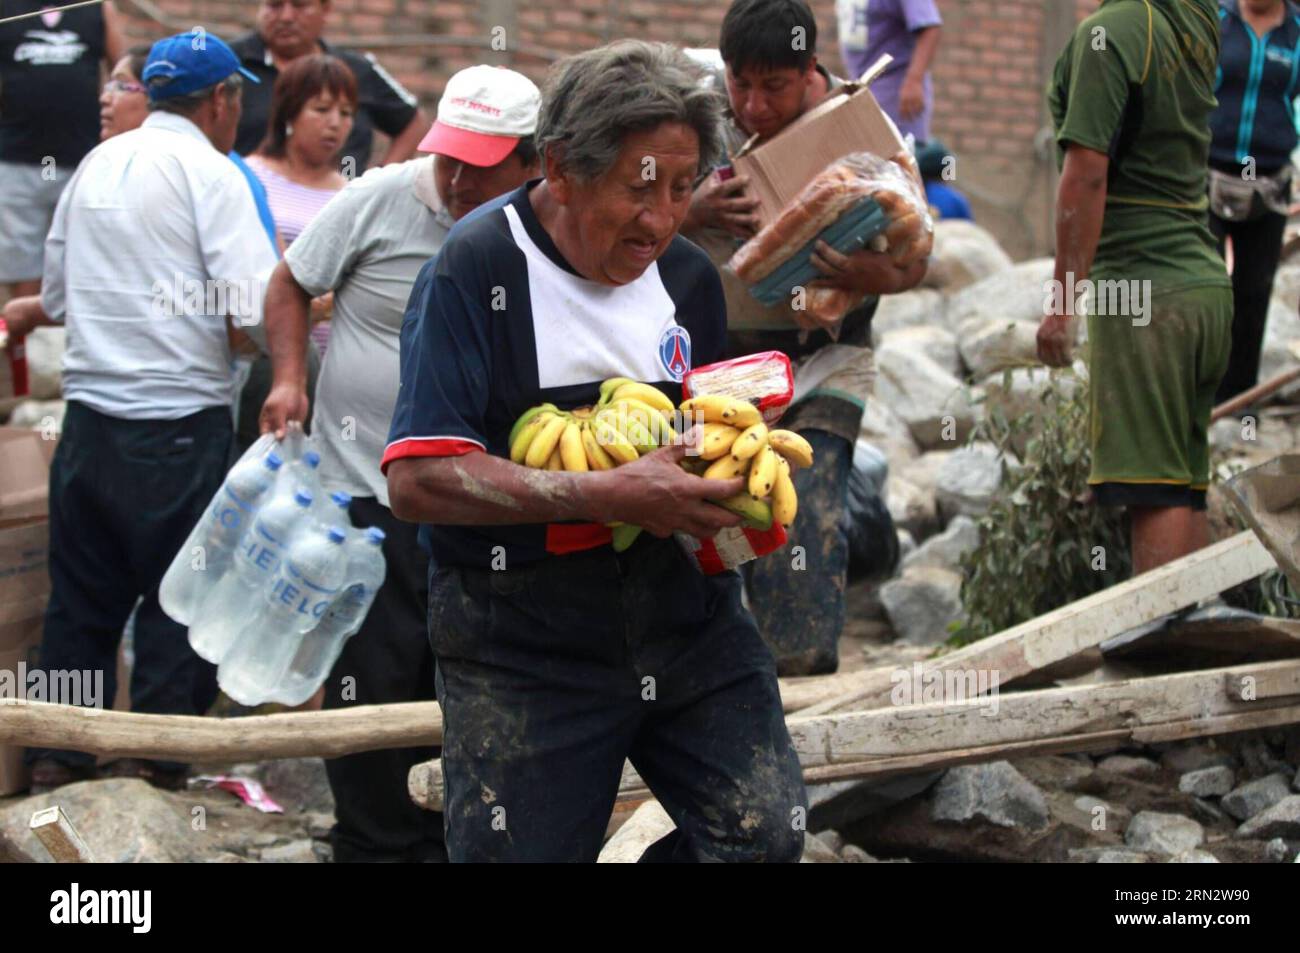 CHOSICA, March 25, 2015 -- People receive supplies after the landslides in Chosica, Peru, on March 25, 2015. At least nine people were killed and four others are still missing in Peru after a massive landslide buried parts of a town amid heavy rains on Monday, authorities said on Tuesday.Melina Mejia/) PERU-CHOSICA-LANDSLIDE ANDINA PUBLICATIONxNOTxINxCHN   March 25 2015 Celebrities receive SUPPLIES After The  in  Peru ON March 25 2015 AT least Nine Celebrities Were KILLED and Four Others are quiet Missing in Peru After a Massive landslide Buried Parts of a Town Amid Heavy Rains ON Monday Autho Stock Photo